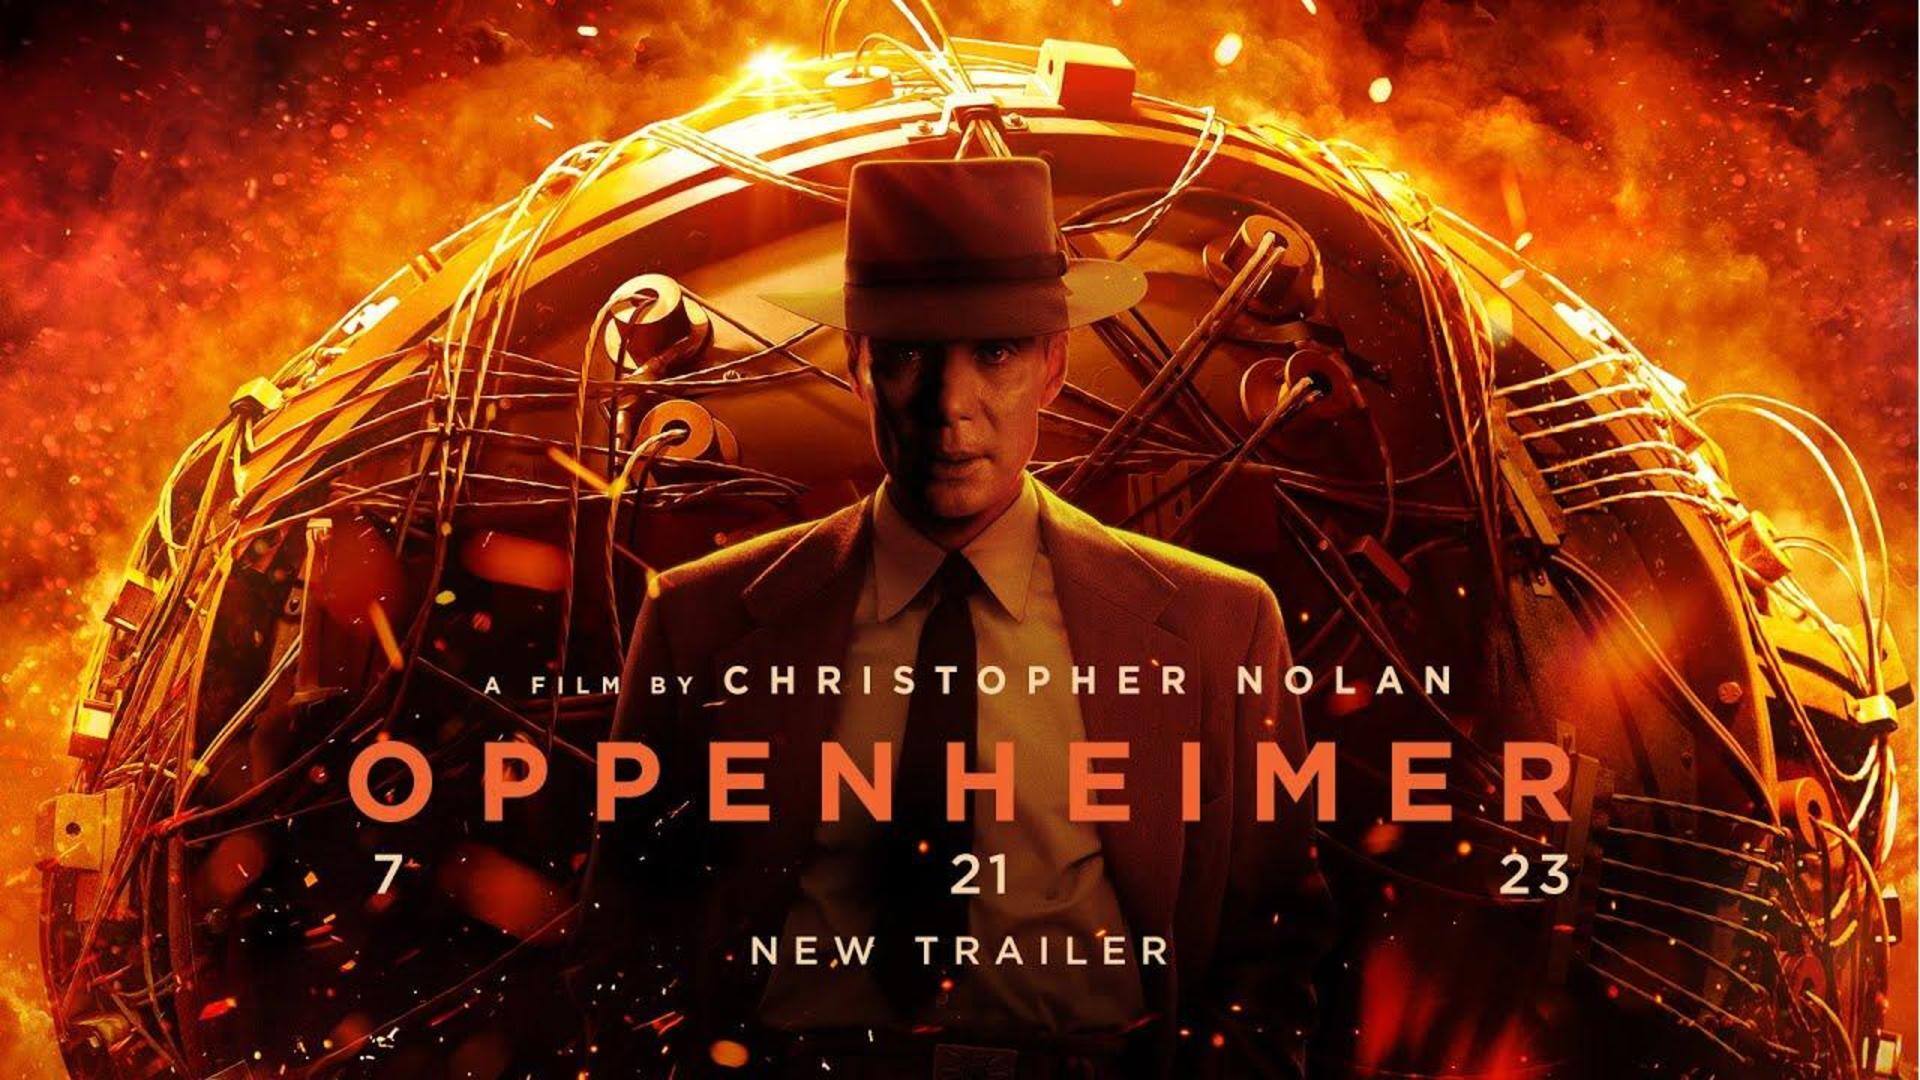 #BoxOfficeCollection: 'Oppenheimer' inching toward Rs. 100 crore mark in India